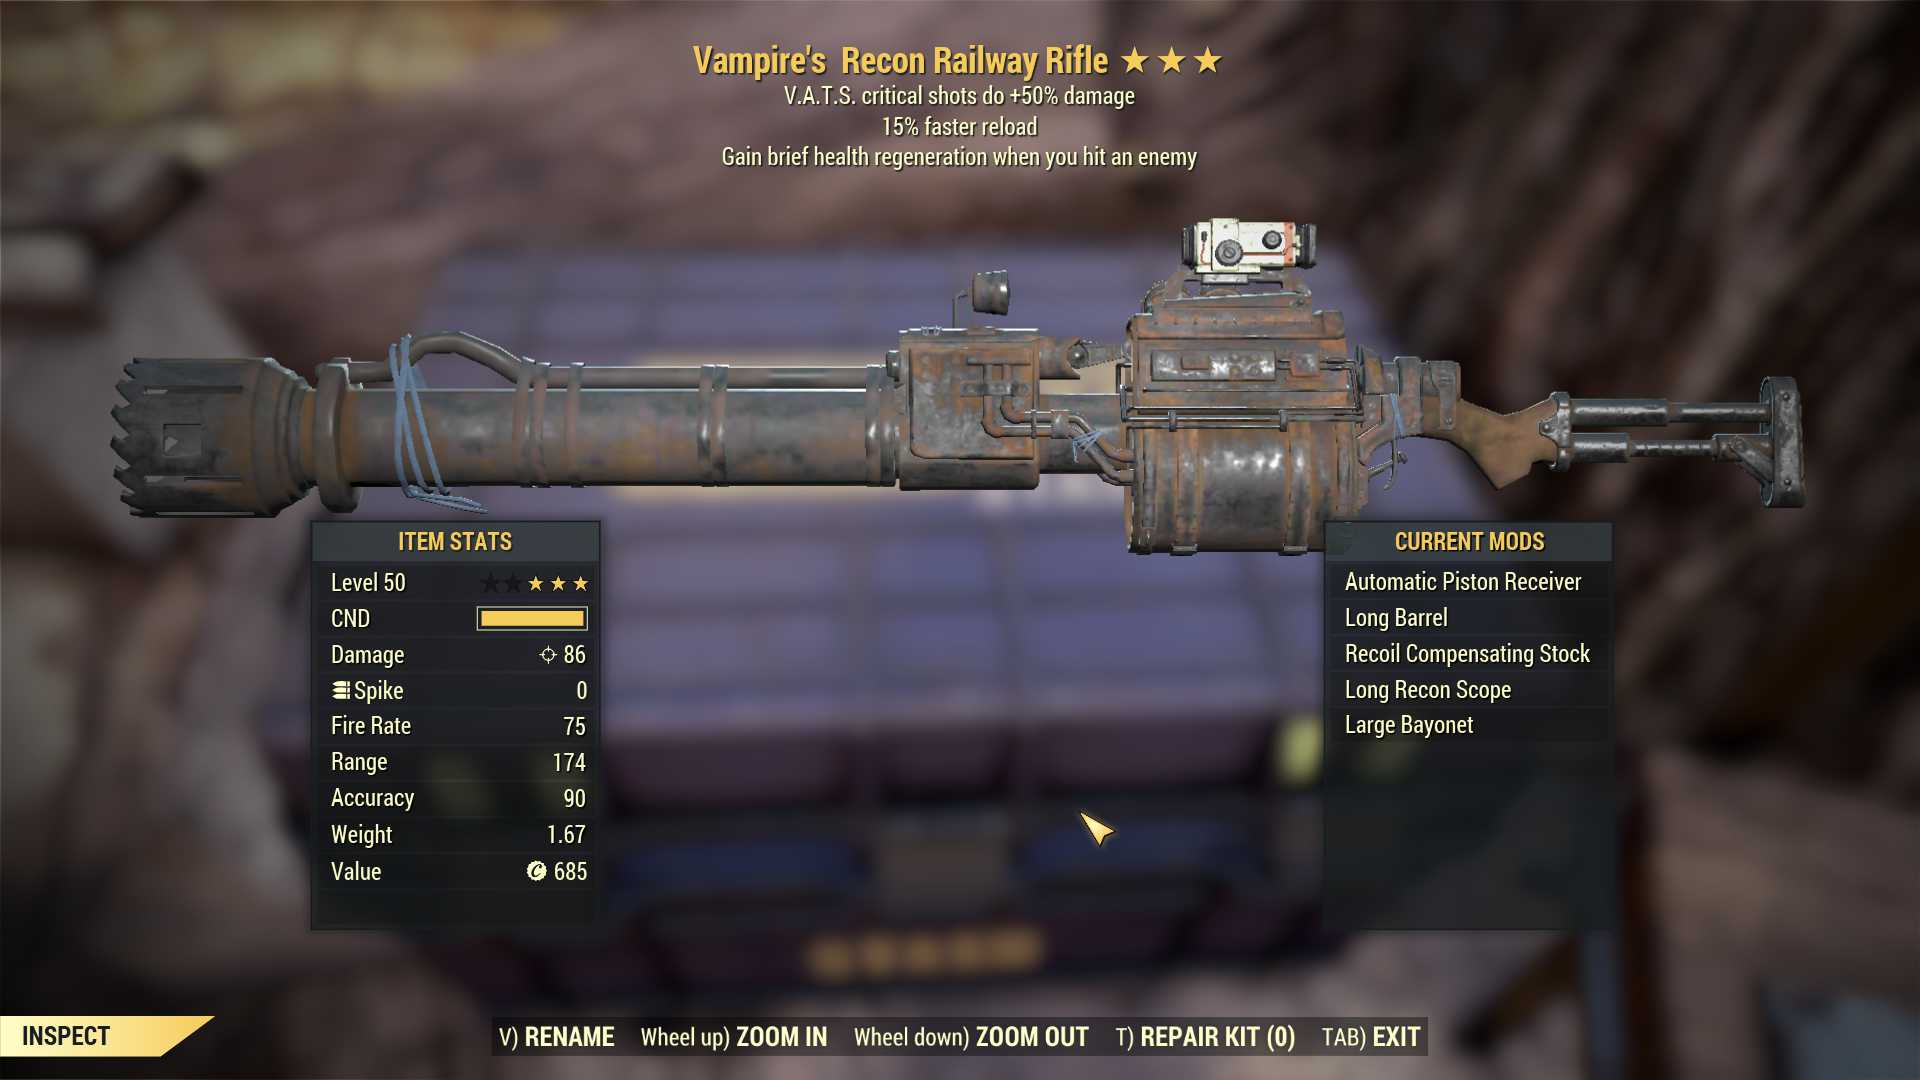 Vampire's Railway (+50% critical damage, 15% faster reload)